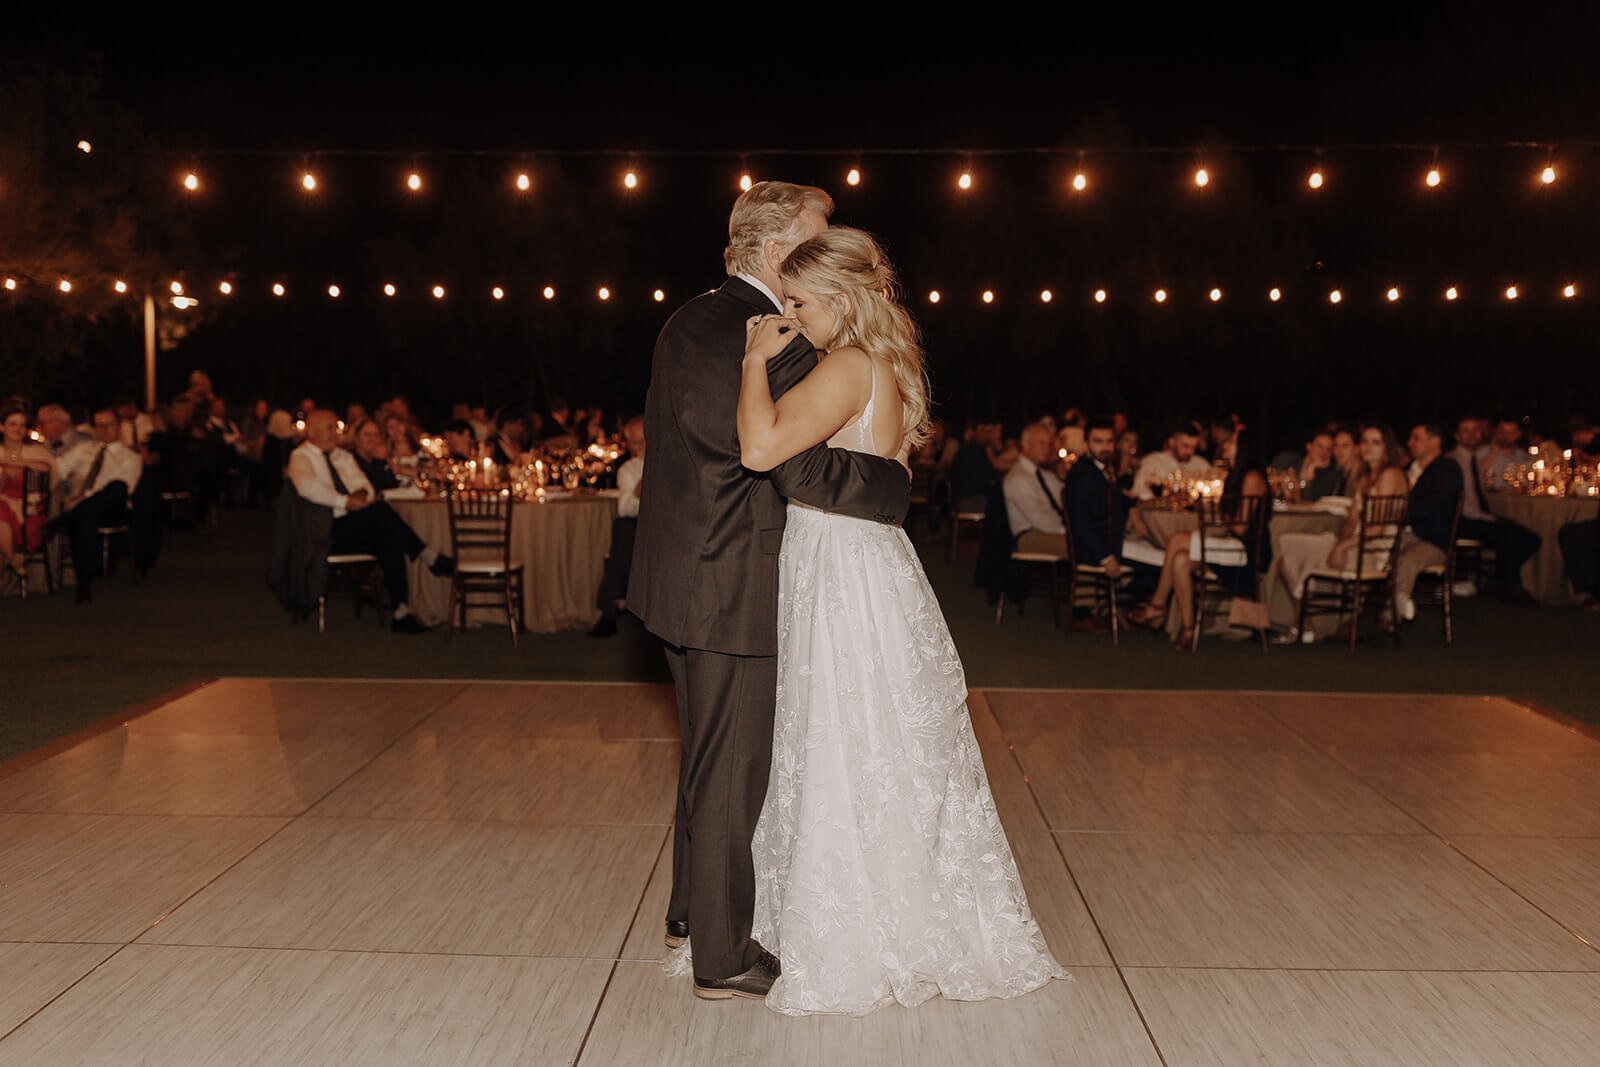 Bride dances with father at evening outdoor wedding reception